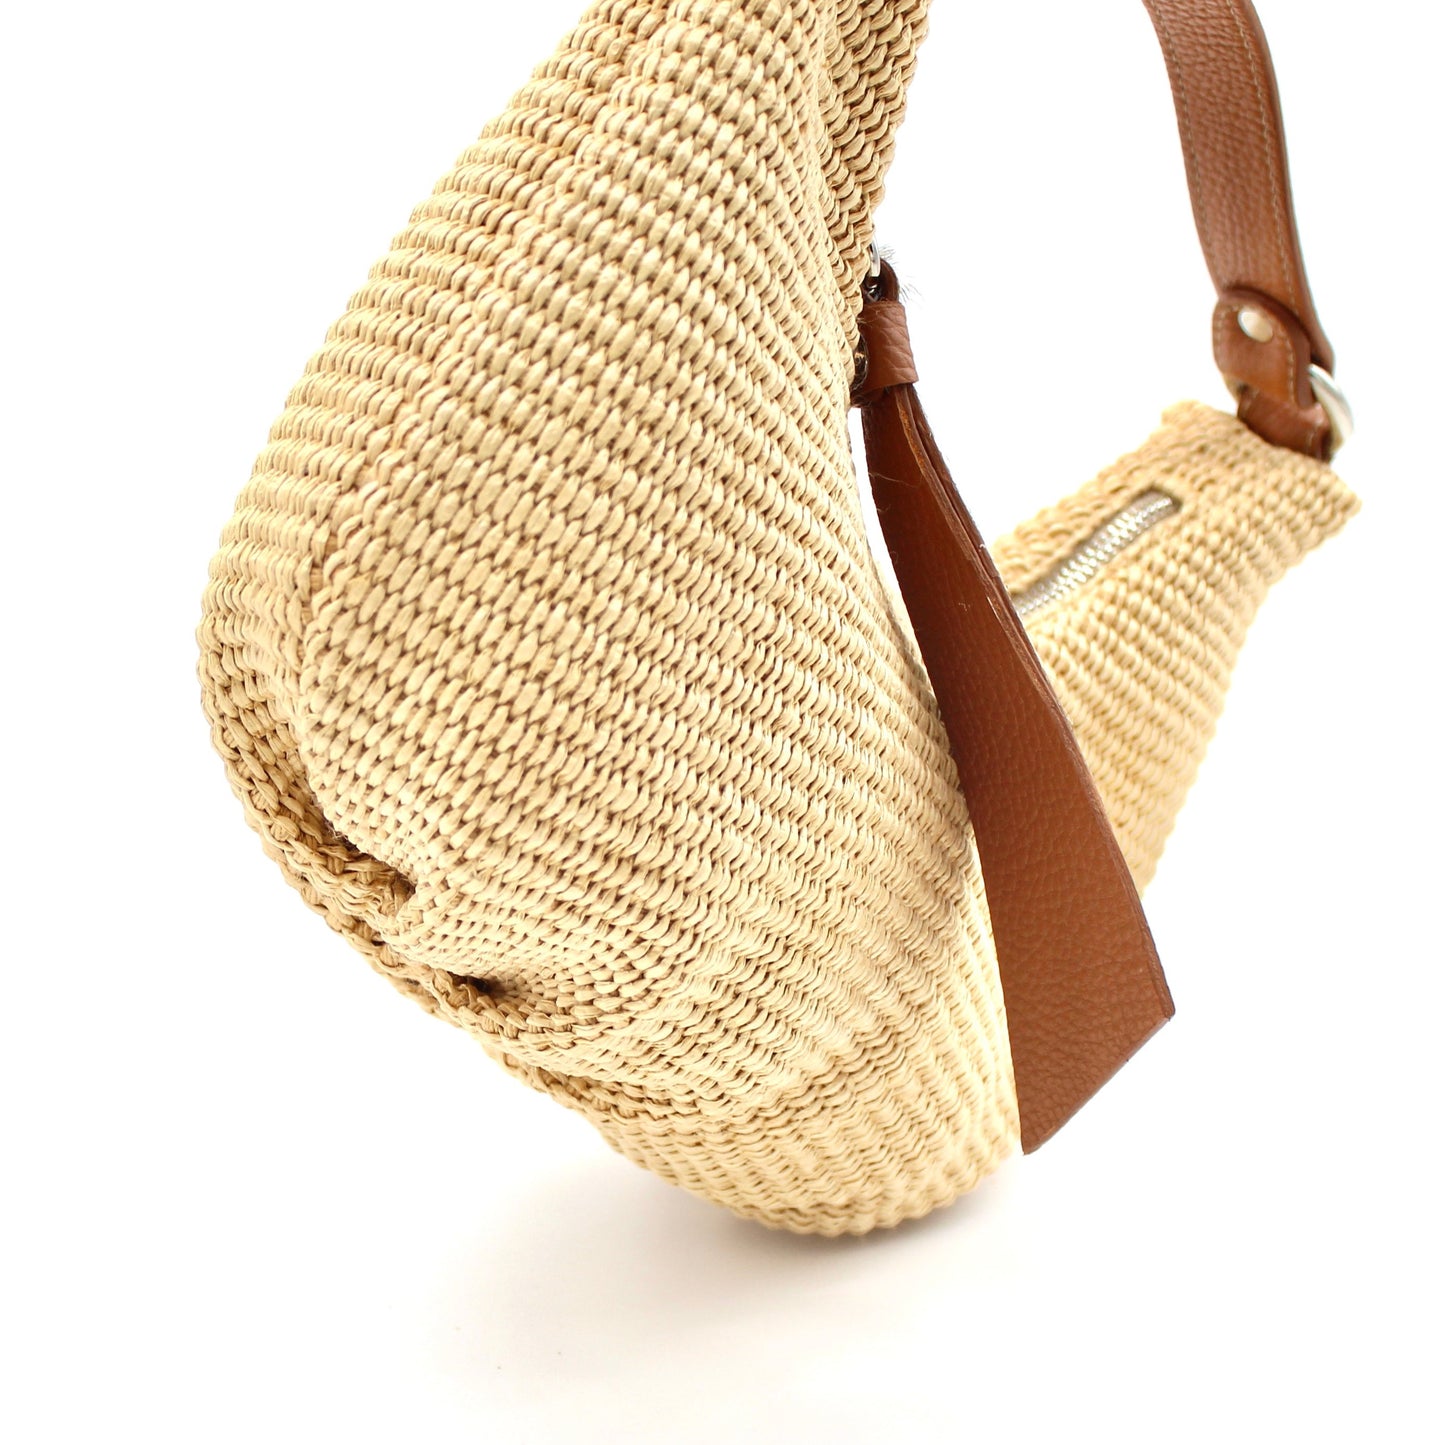 The Beatrice Hobo small bag in natural raffia is the cutest bag from Roberta Gandolfi part of the collection by Mazzi d Fiori  Edit alt text